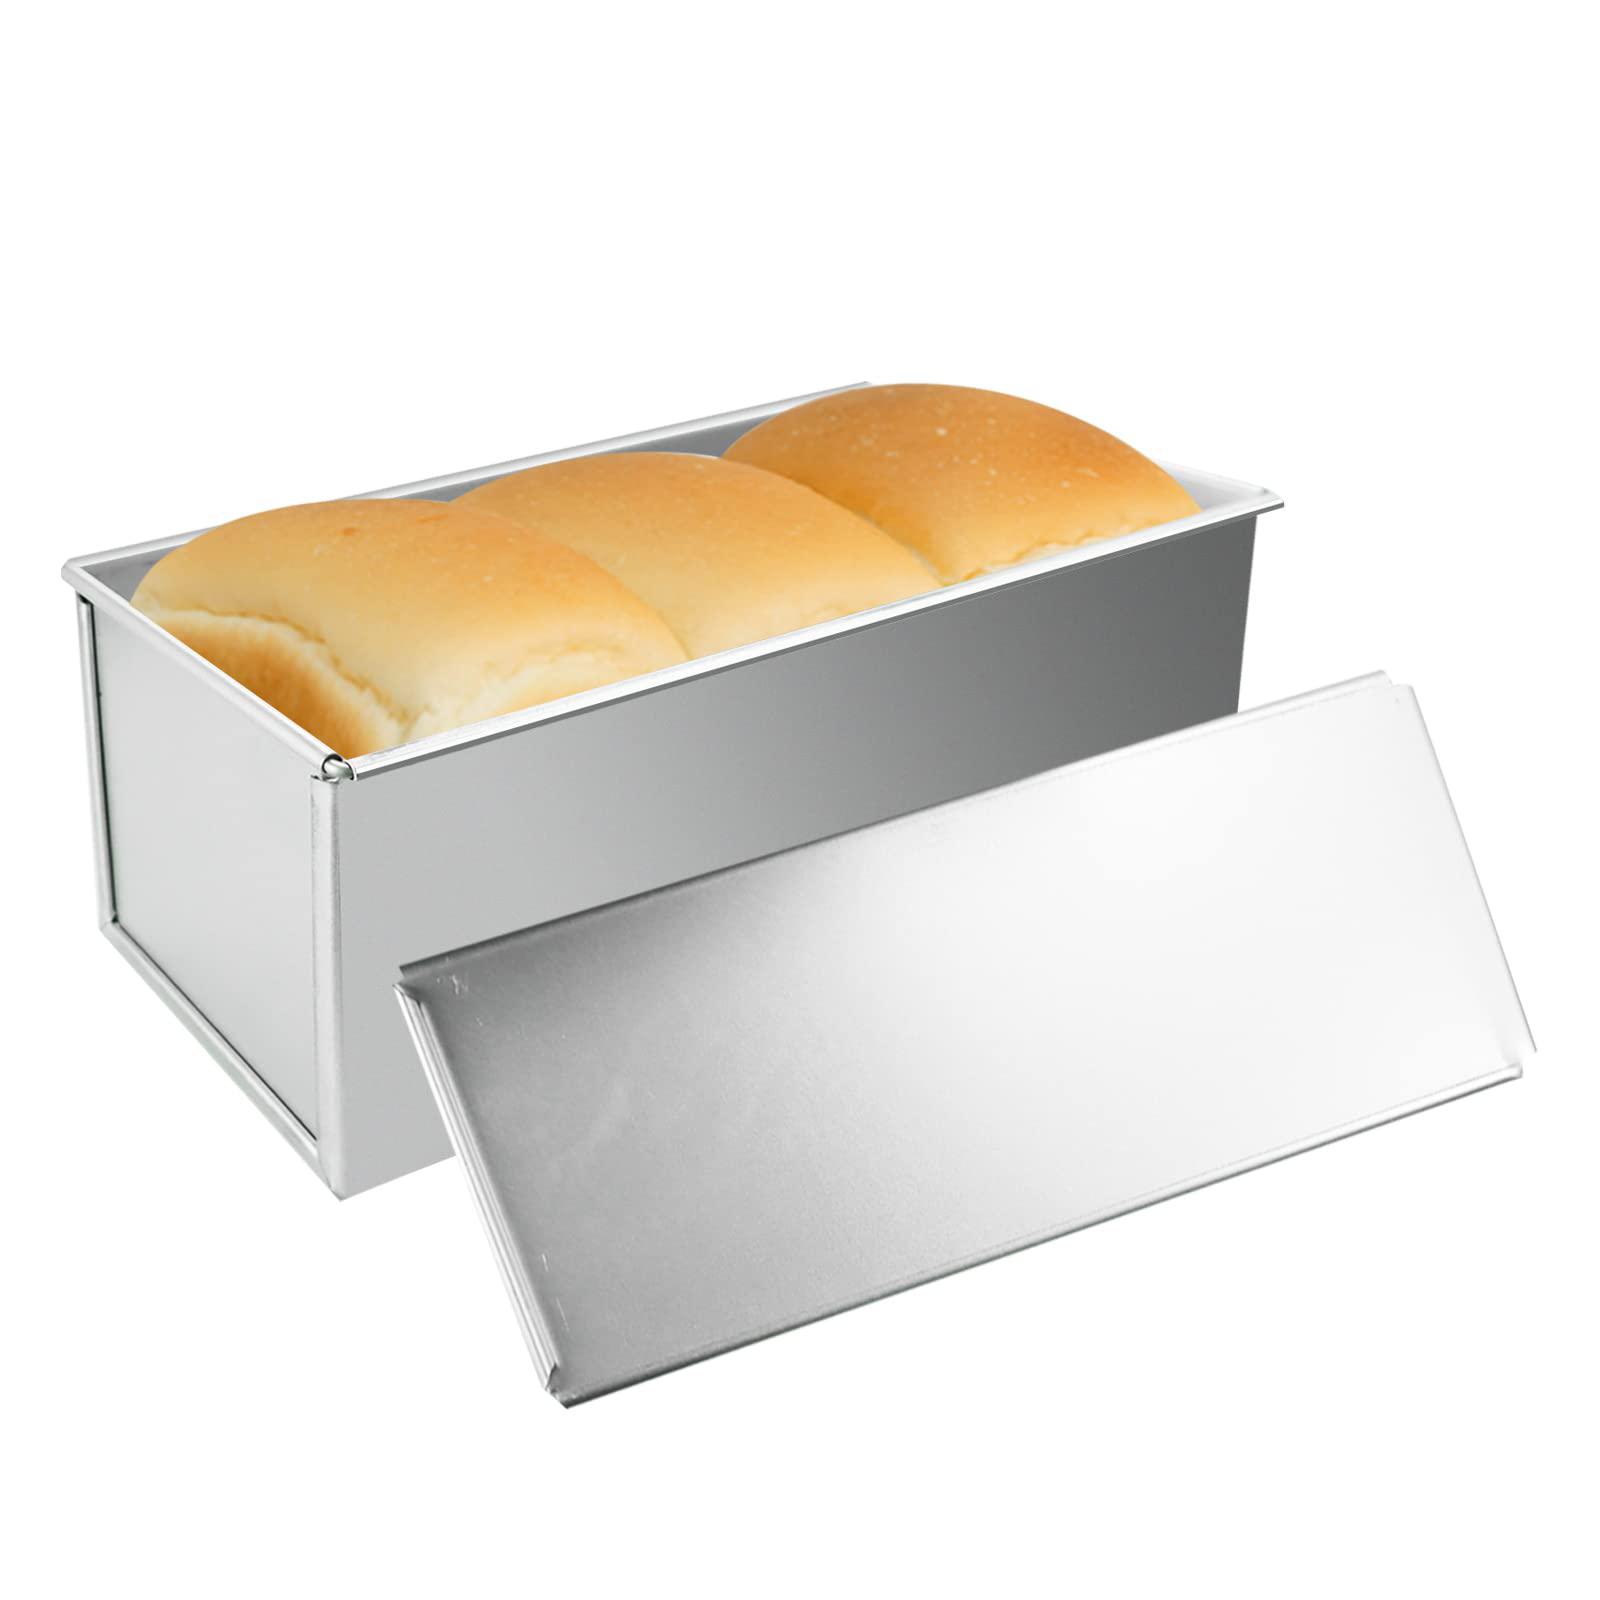 ta best pullman loaf pan with lid aluminumed steel pullman loaf pan commercial grade non stick bread pan with lid (10x3.93x4.